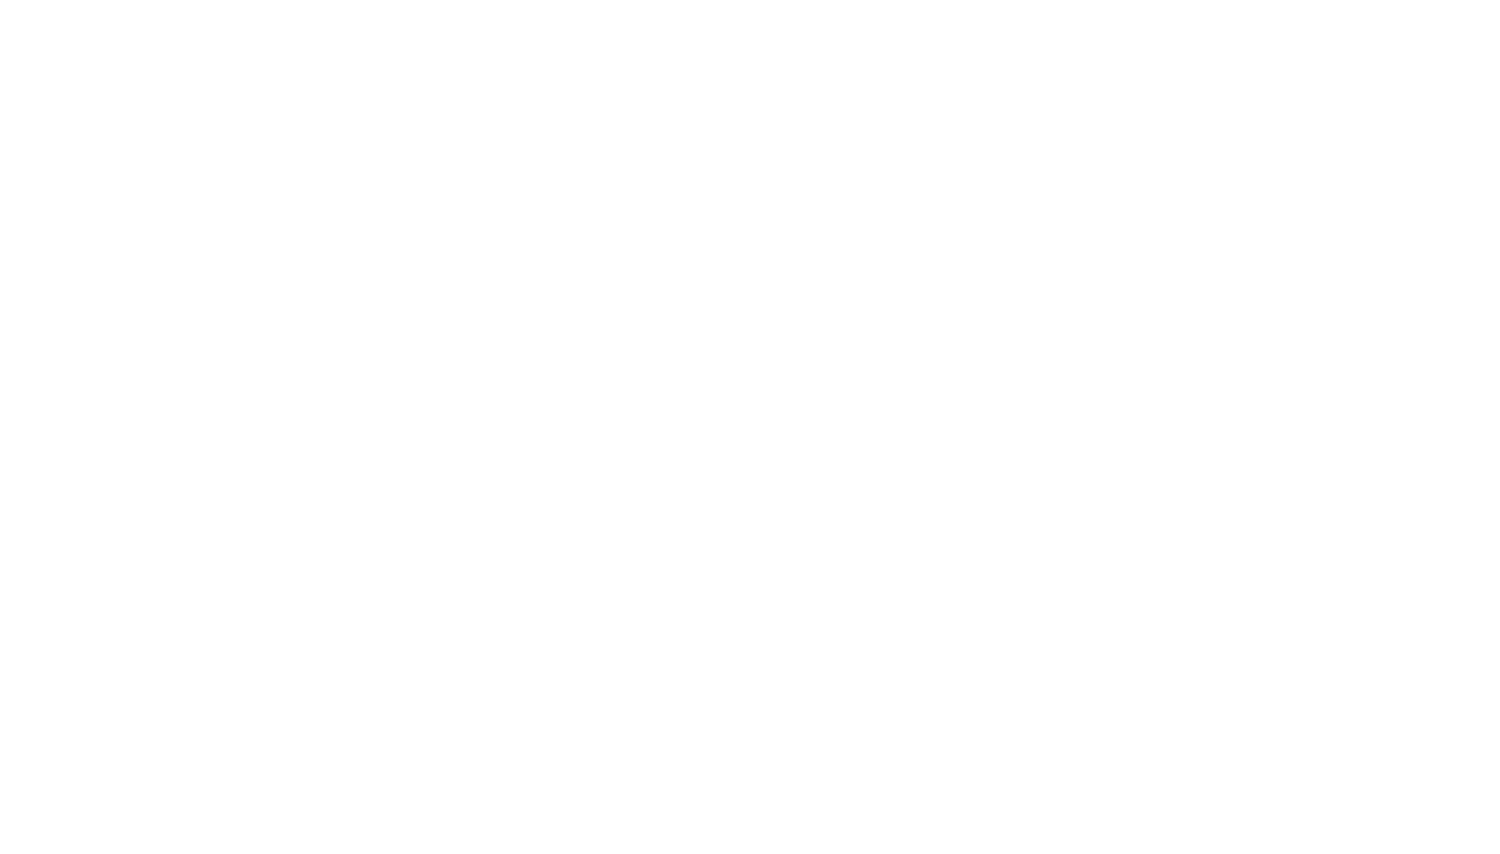 Underwater Earth Limited